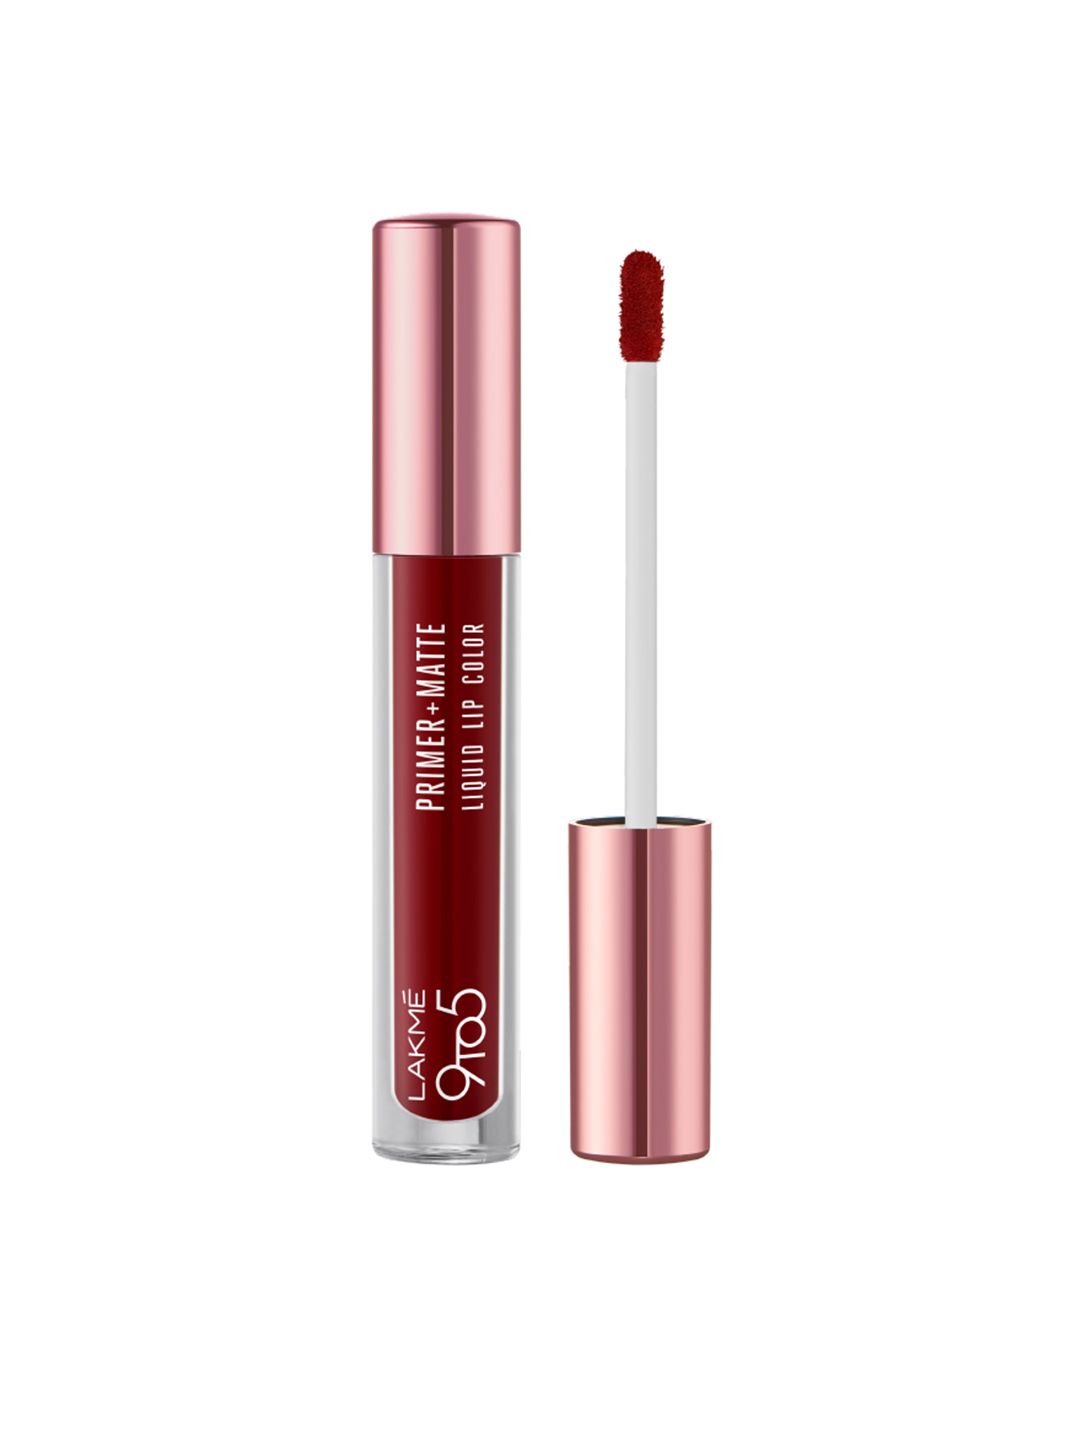 Lakme 9 to 5 Primer+Matte Liquid Lip Color with Vit- E and Argan Oil 4.2ml-Deep Maroon MR4 Price in India